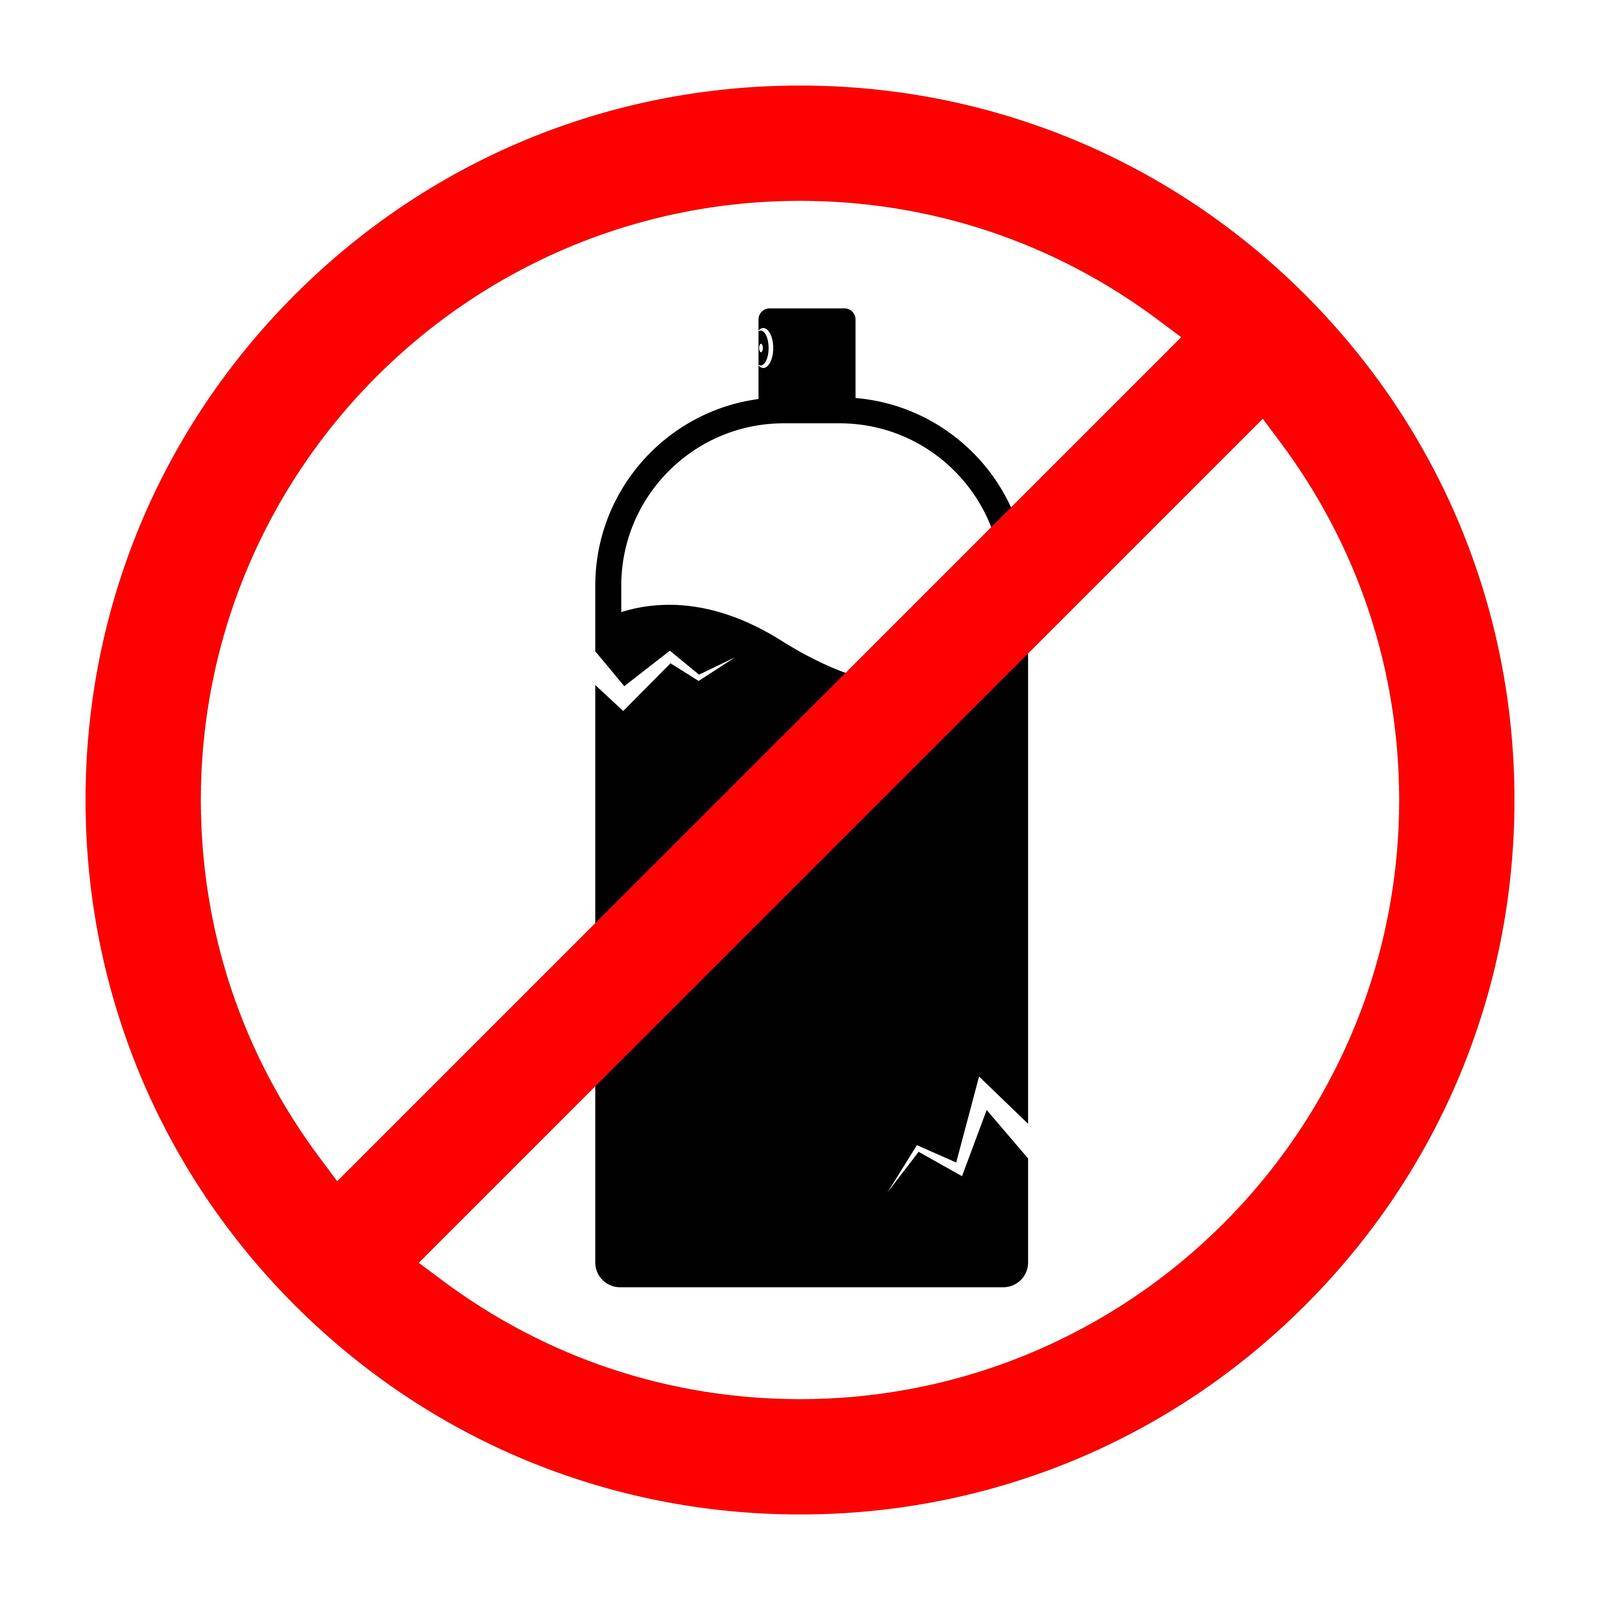 No Aerosol spray sign. Vector illustration. Stop spray paint sign. Do not use a damaged spray paint can.